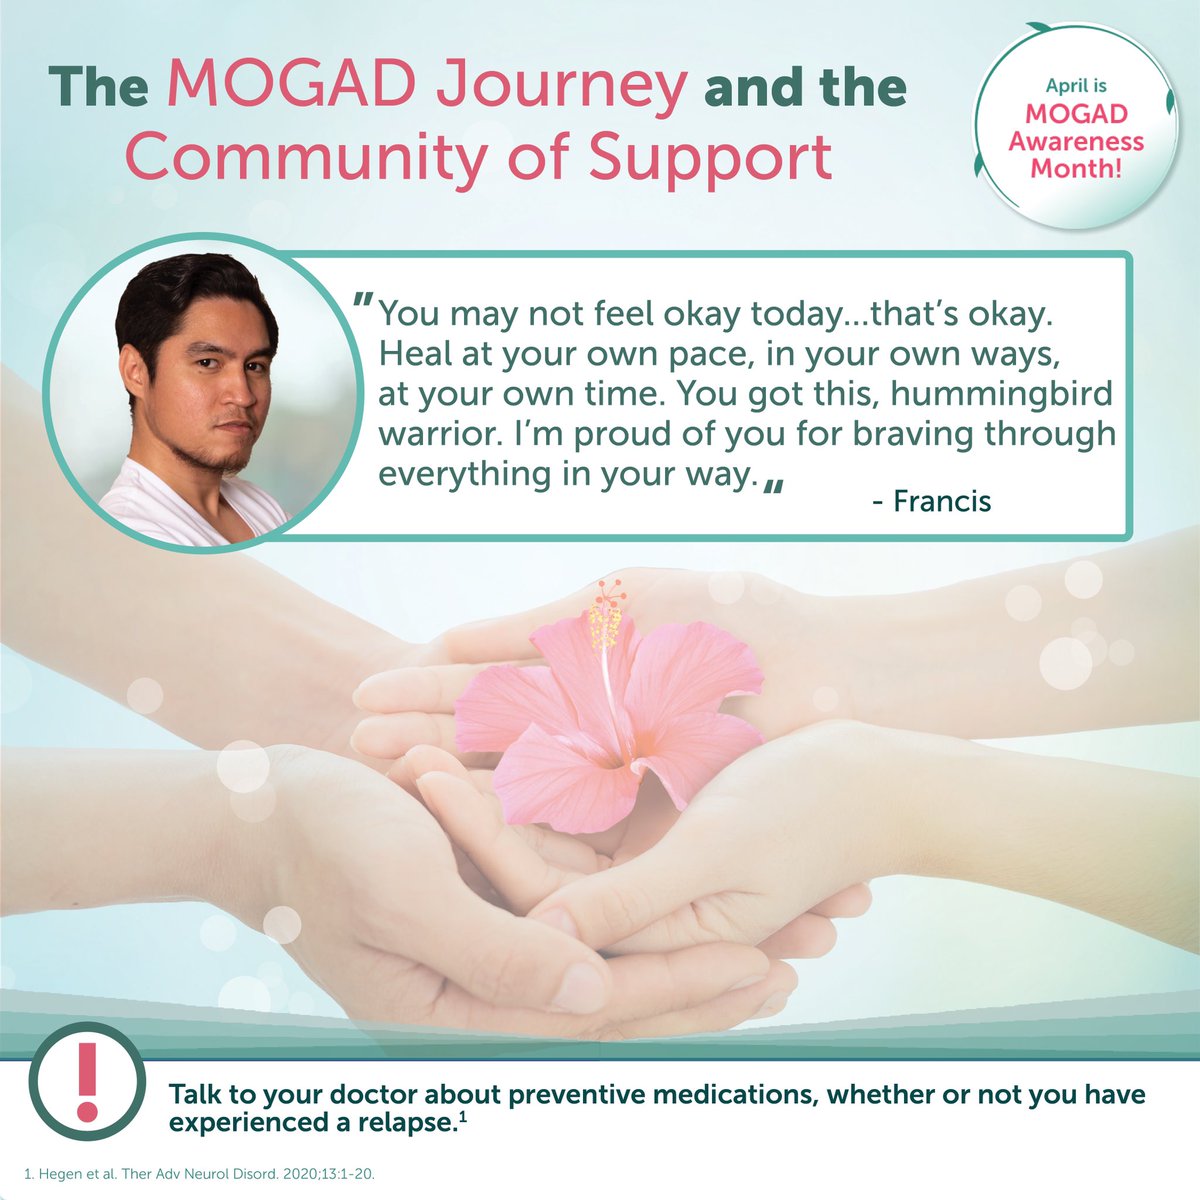 April is MOGAD Awareness Month! #mogadawarenessmonth #MOGAD #raredisease   MOGAD may be monophasic, where only one attack occurs, or it can be multiphasic, meaning additional attacks (or relapses) occur. It is a life-long disease but can be managed with preventative treatment.